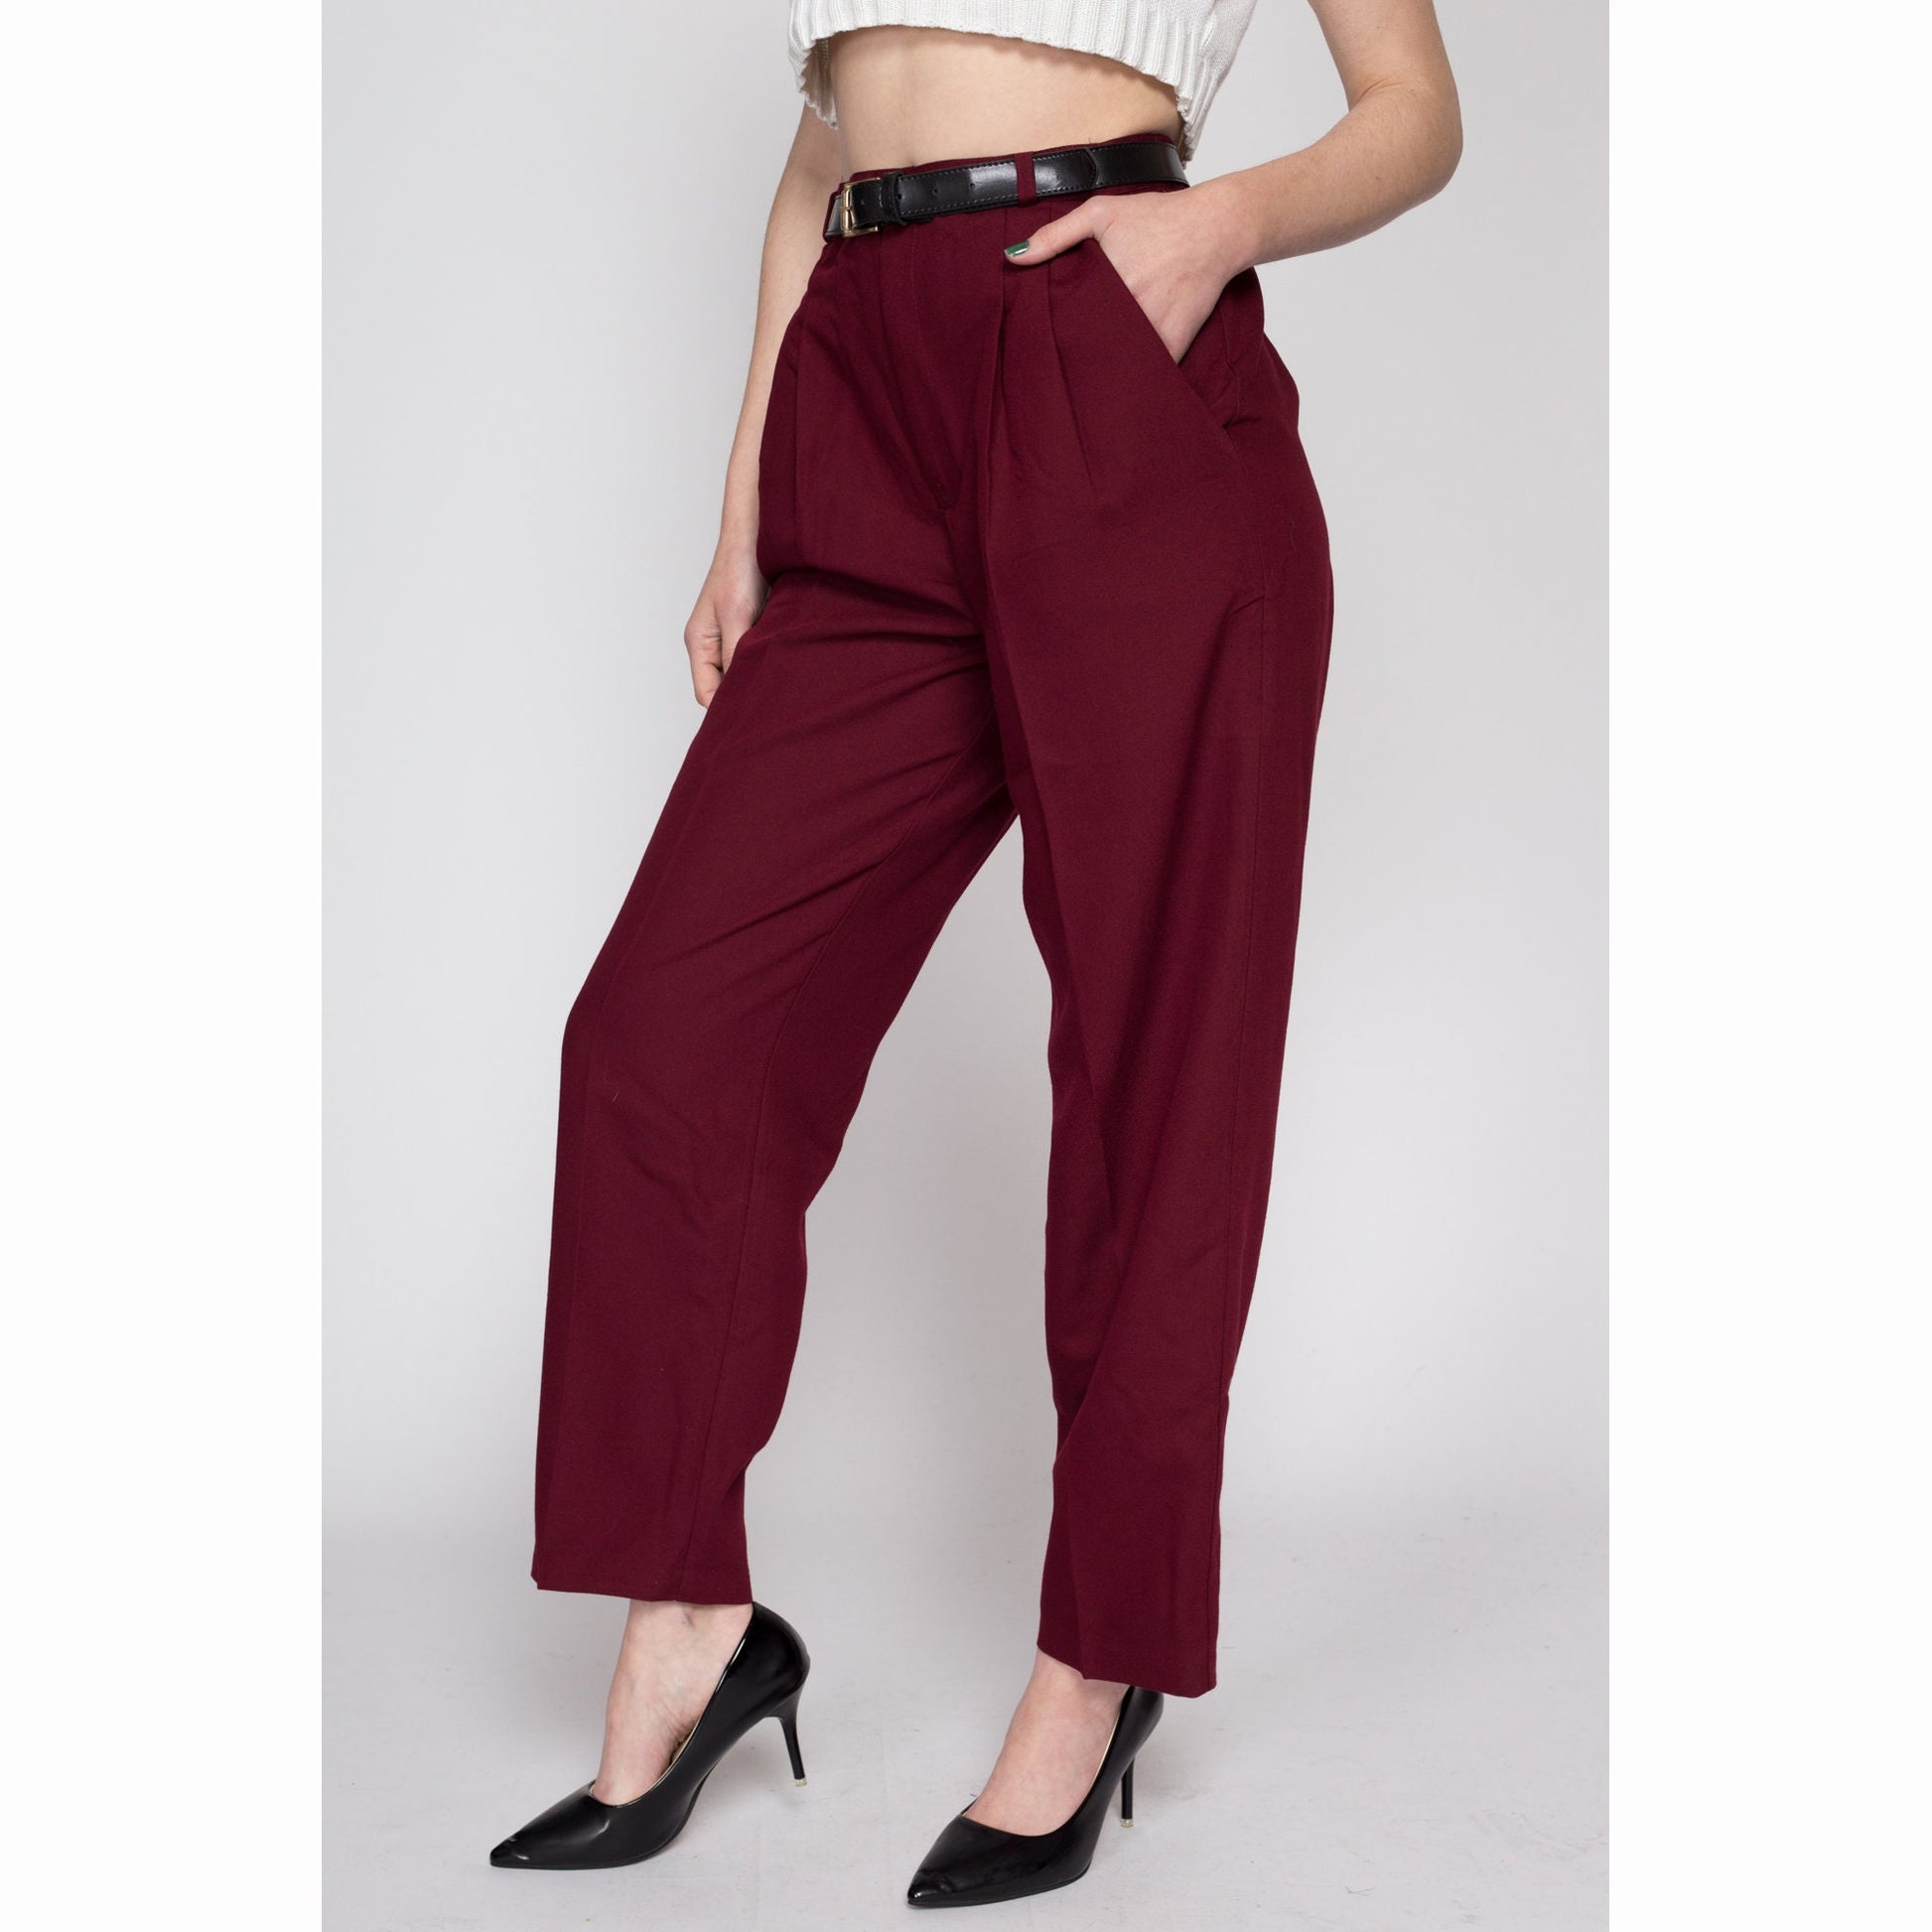 Med-Lrg 80s Maroon Belted Trousers NWT 28-31 – Flying Apple Vintage